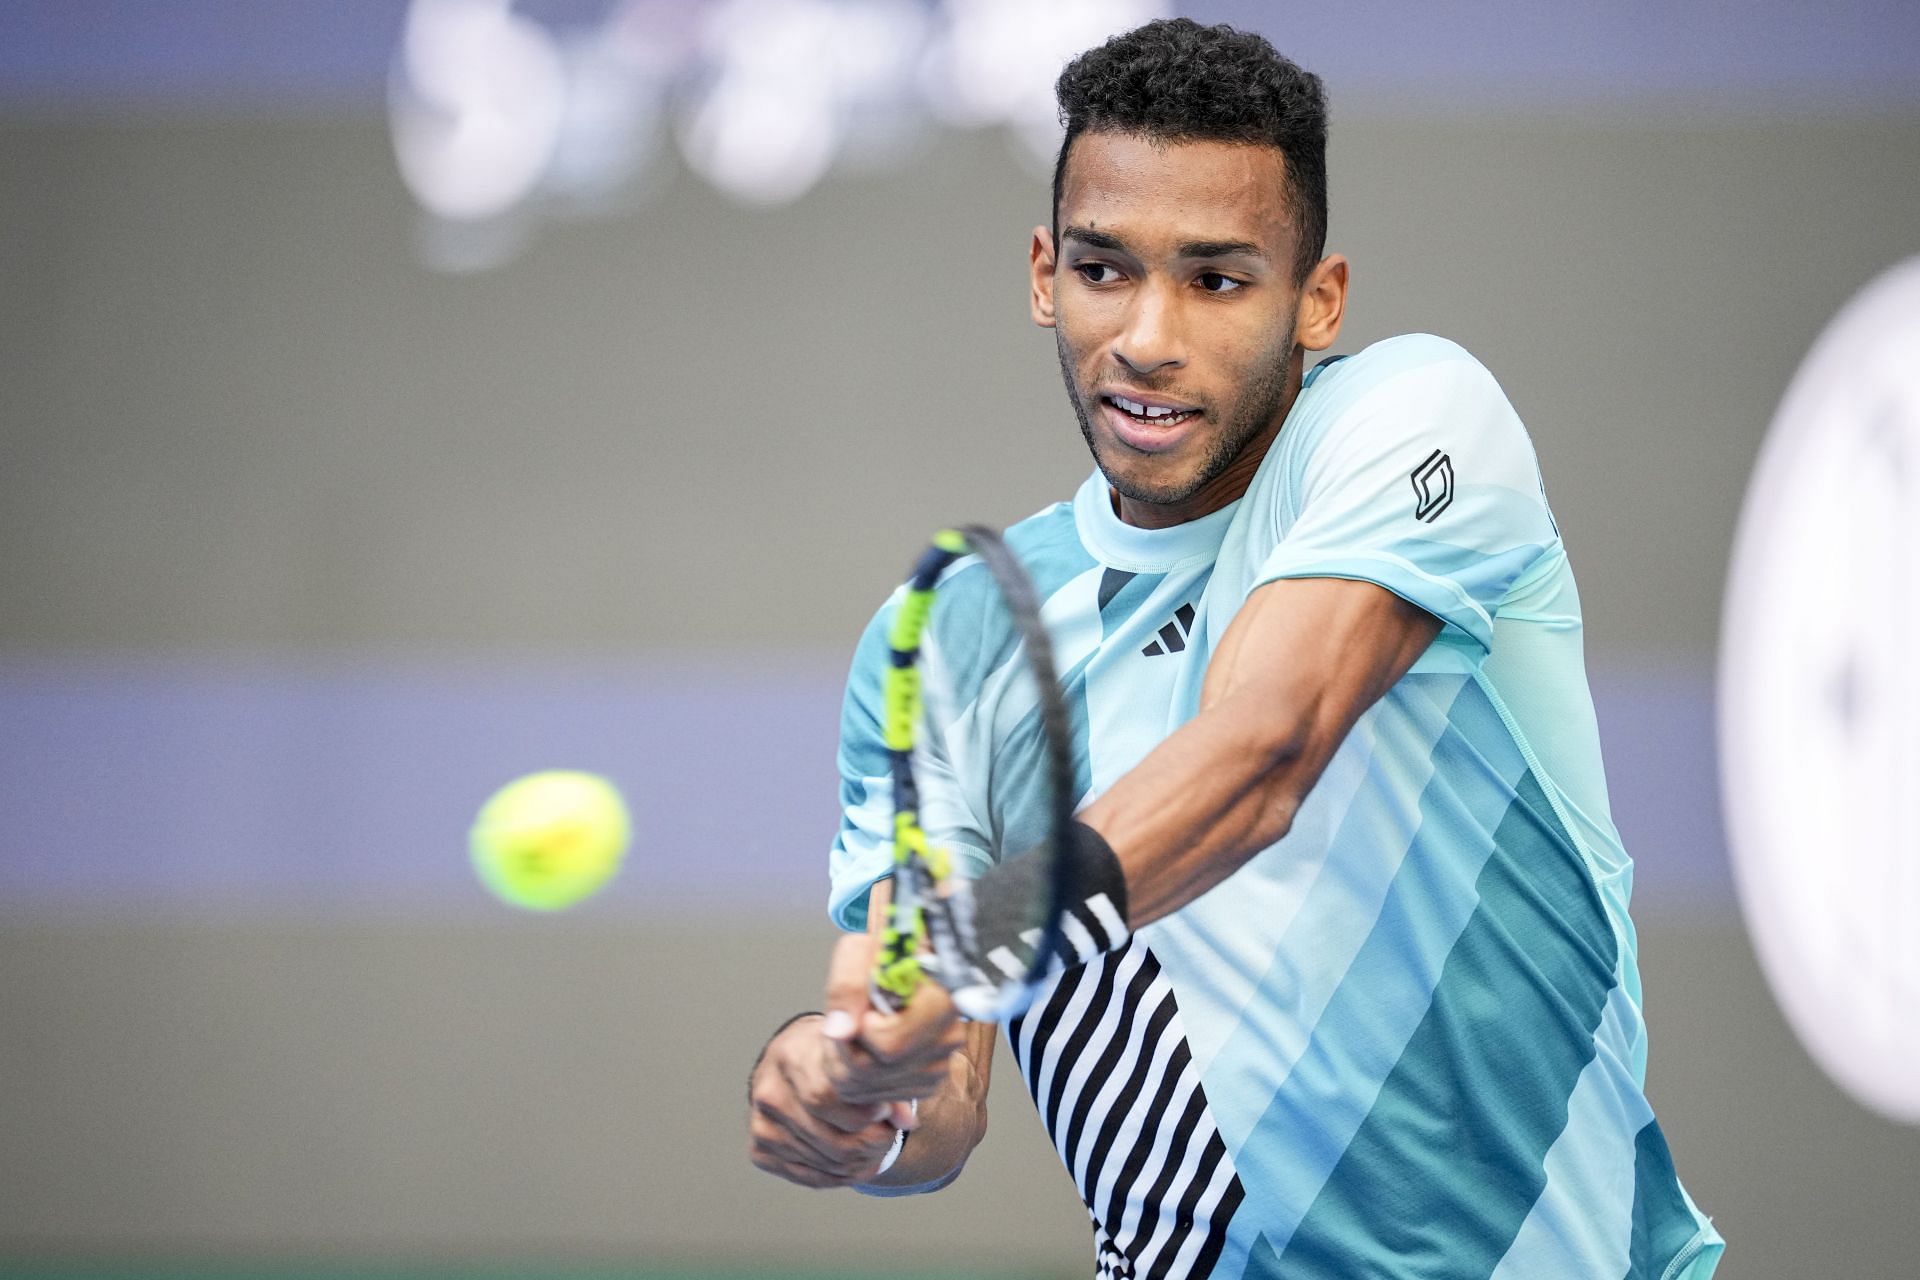 Felix Auger-Aliassime at the 2023 China Open